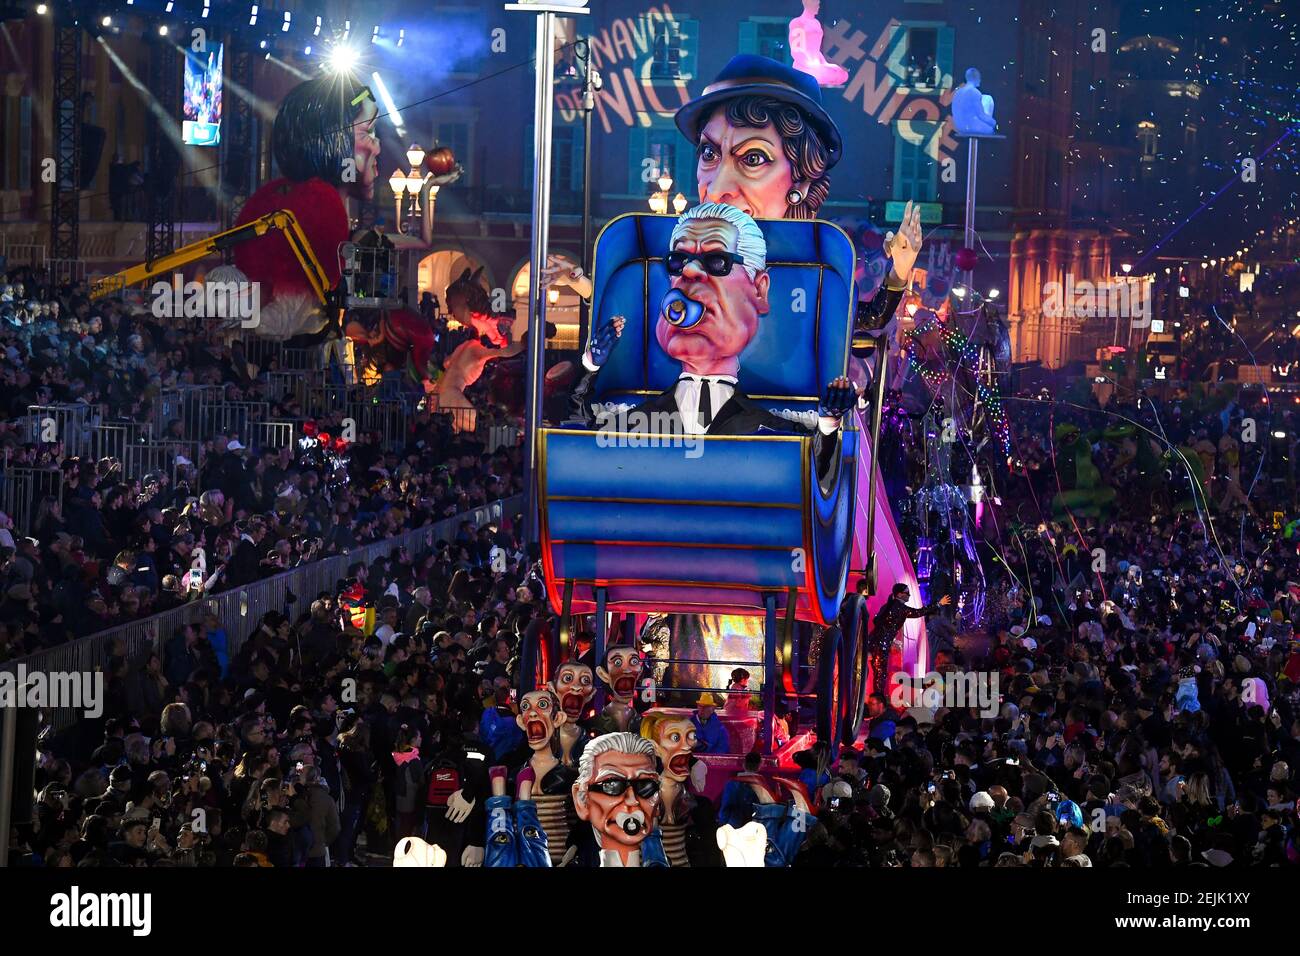 Queen" Coco Chanel and Prince Karl Lagerfeld - Le corso du Roi de la Mode -  Costumed revellers, puppets, parades, flowers and floats are seen on Feb.  15, 2020 in Nice, France